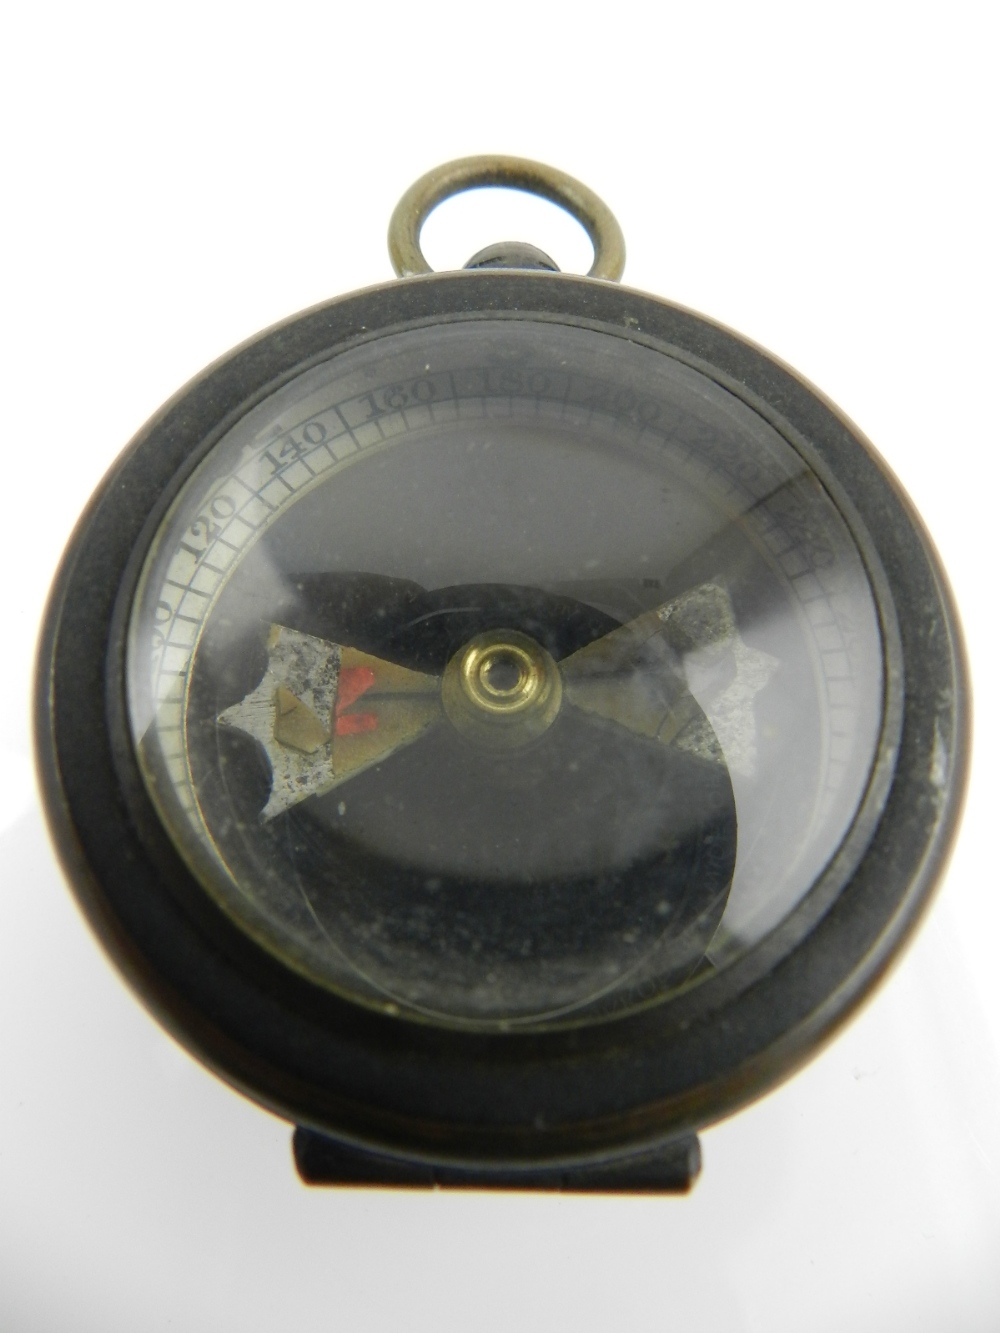 Francis Barker and Son, London. An early 20th century brass cased compass dated 1906.